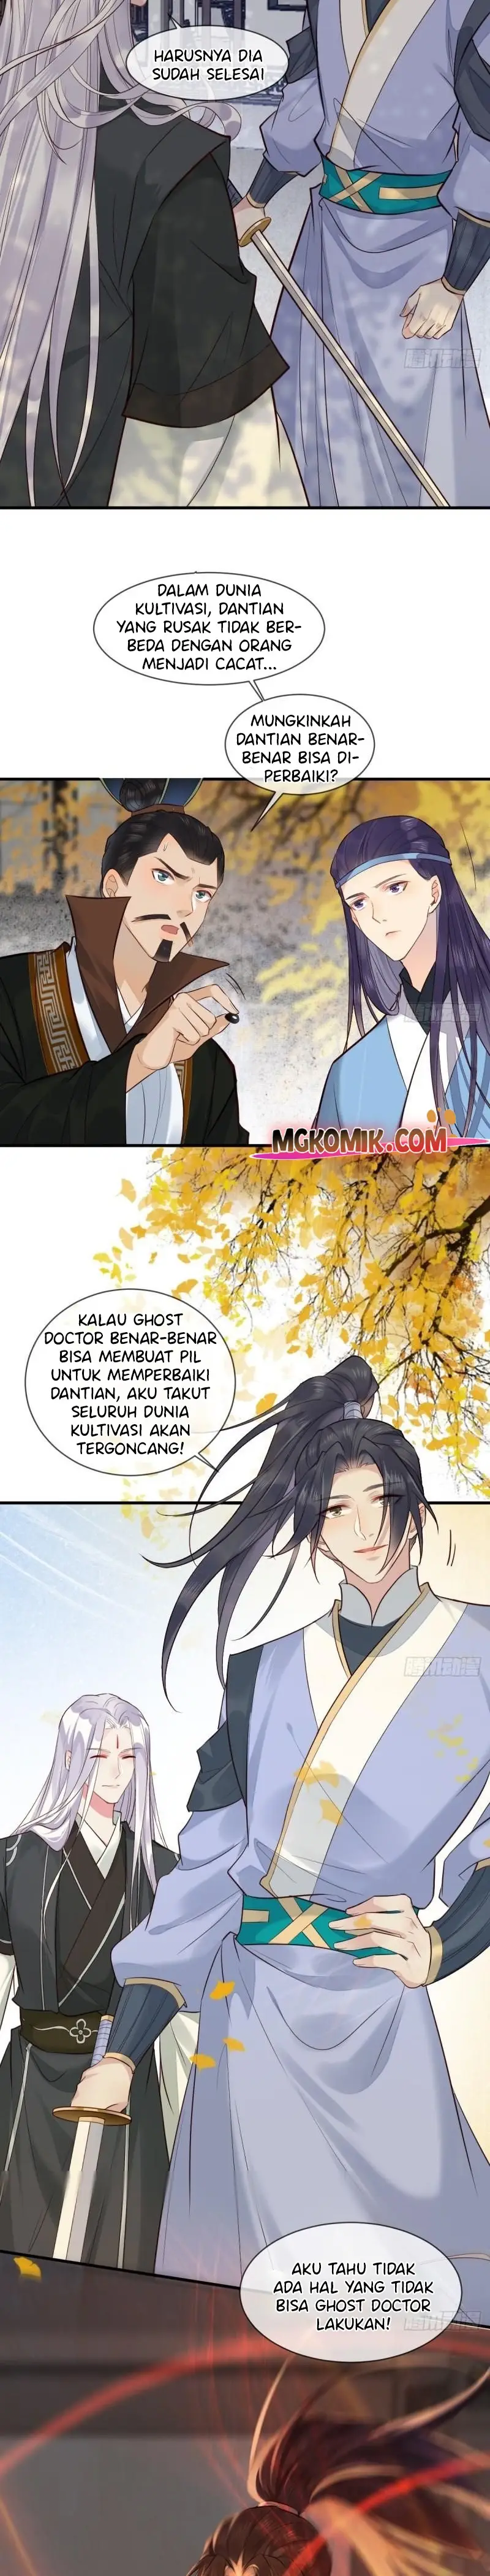 The Ghostly Doctor Chapter 525